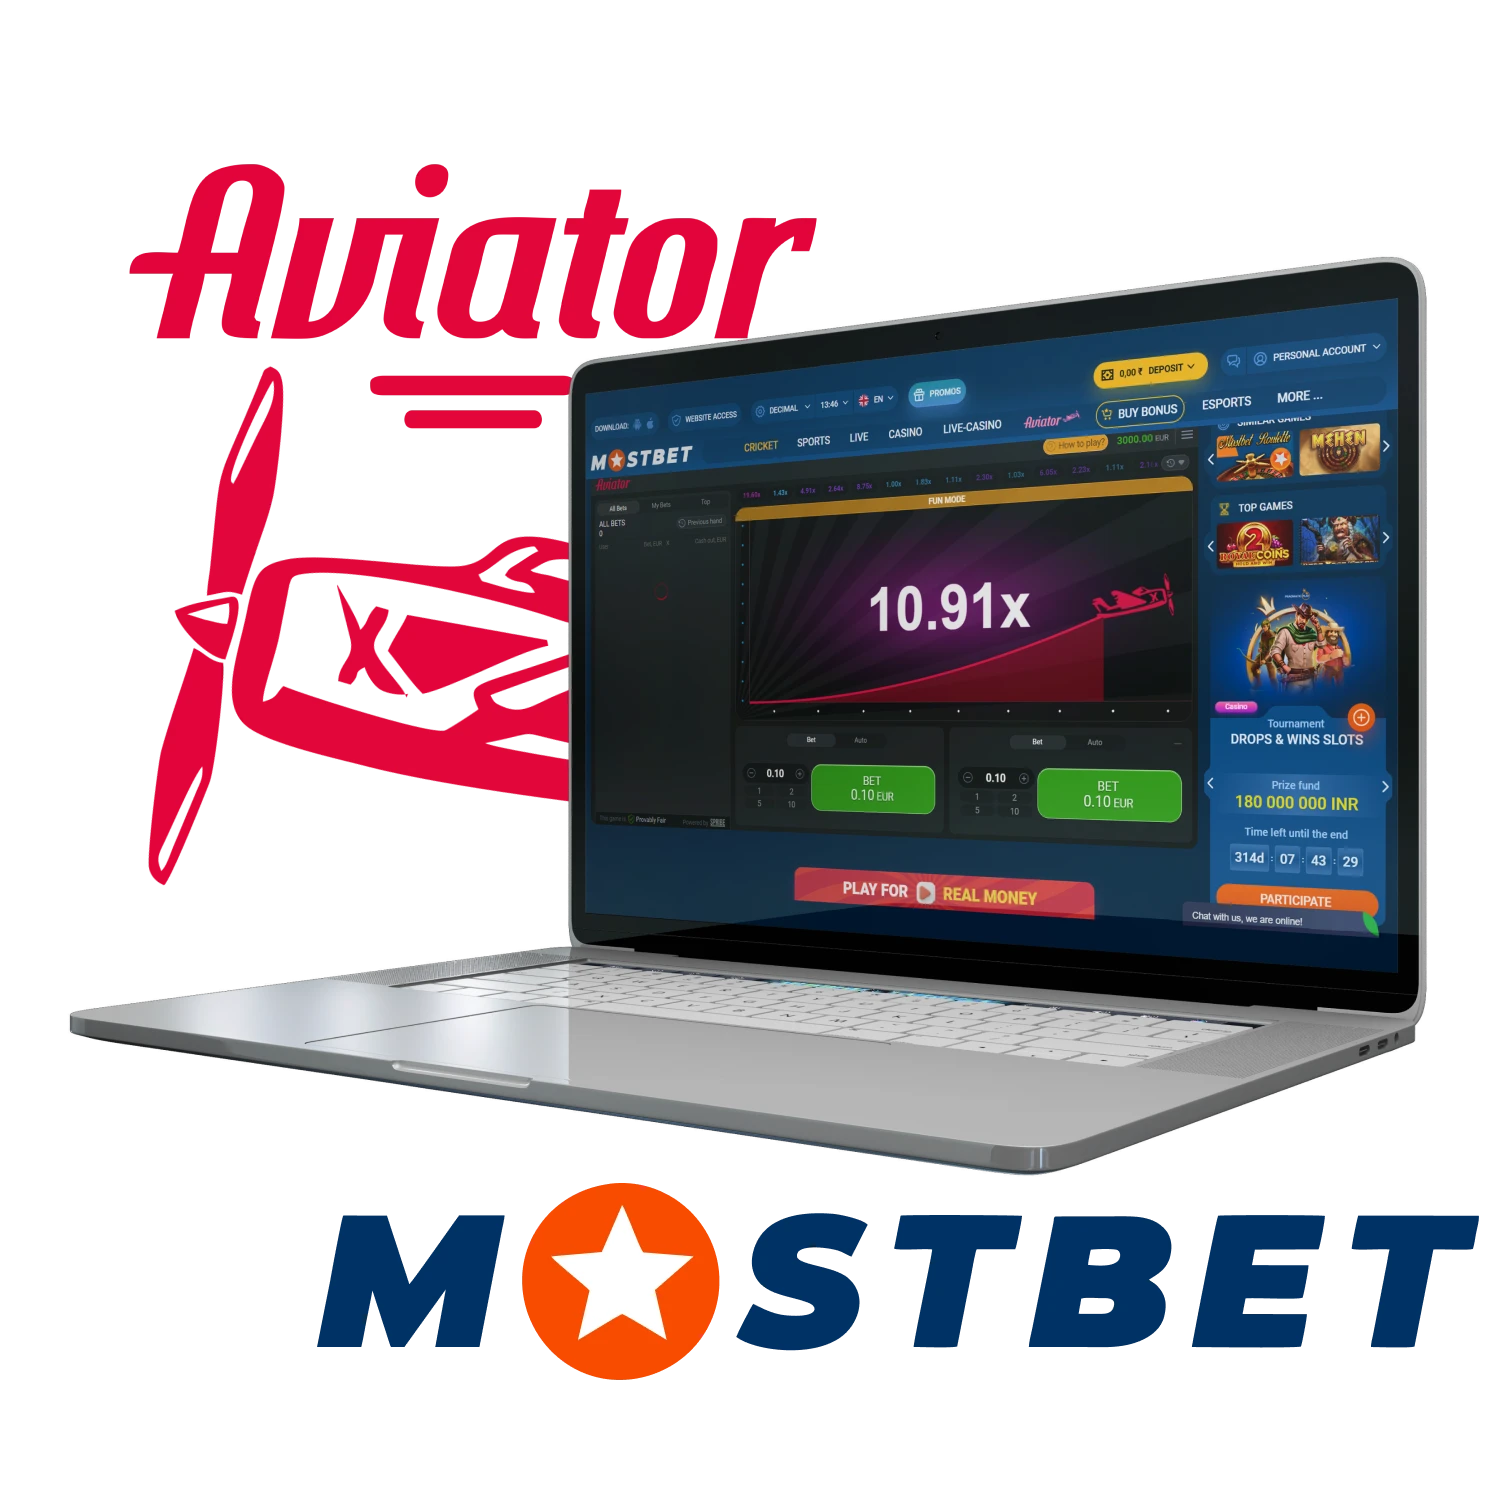 5 Ways You Can Get More Betting company Mostbet in the Czech Republic While Spending Less